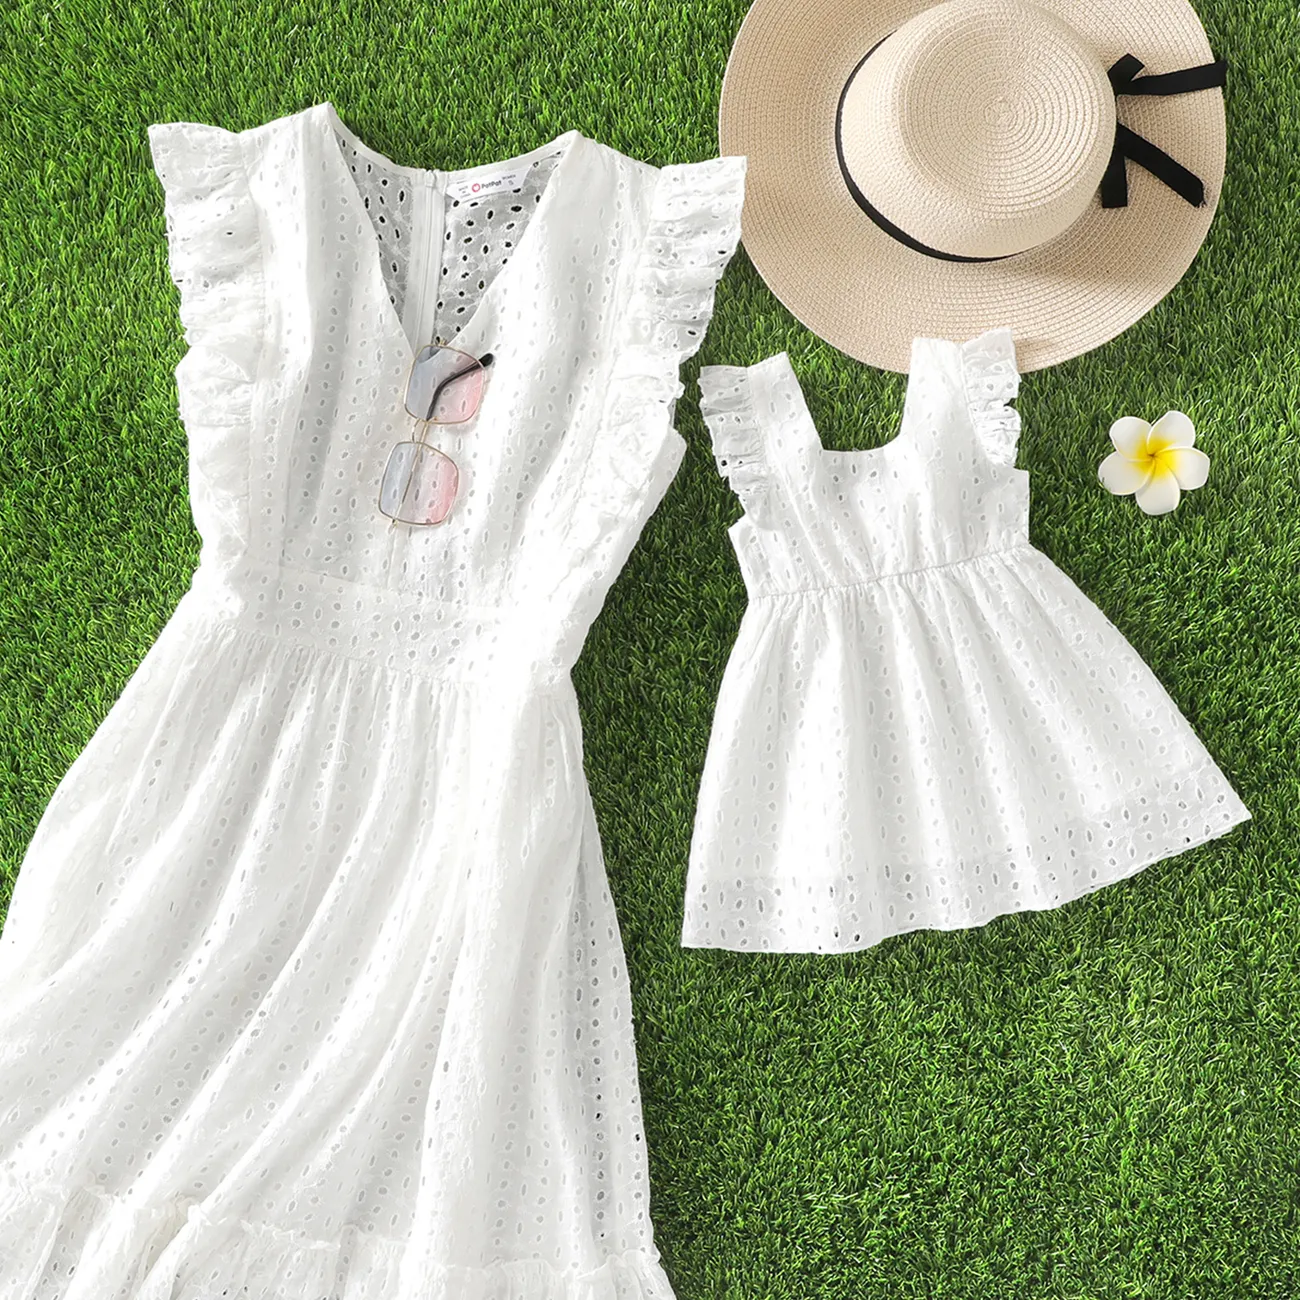 100% Cotton White Hollow-Out Floral Embroidered Ruffle Sleeveless Dress for Mom and Me White big image 1